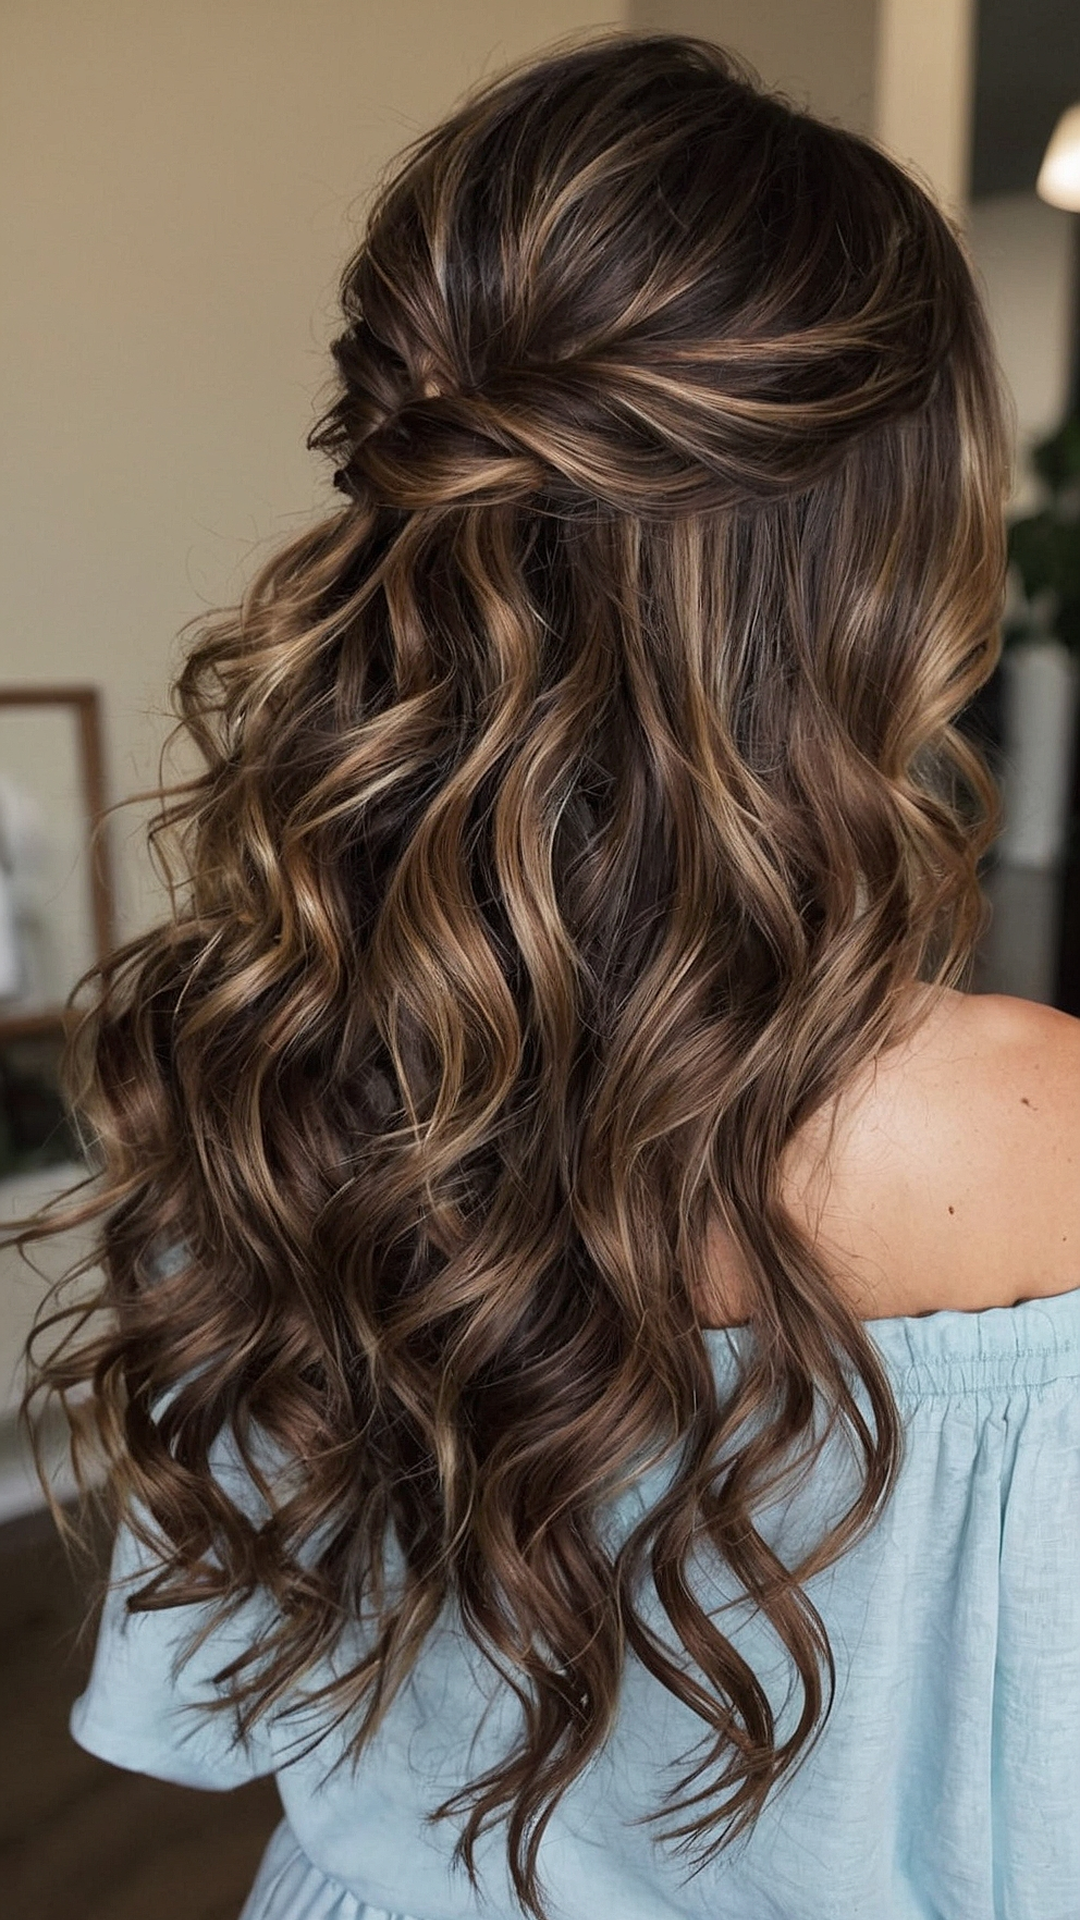 Going with the Flow: Wavy Hair Style Suggestions